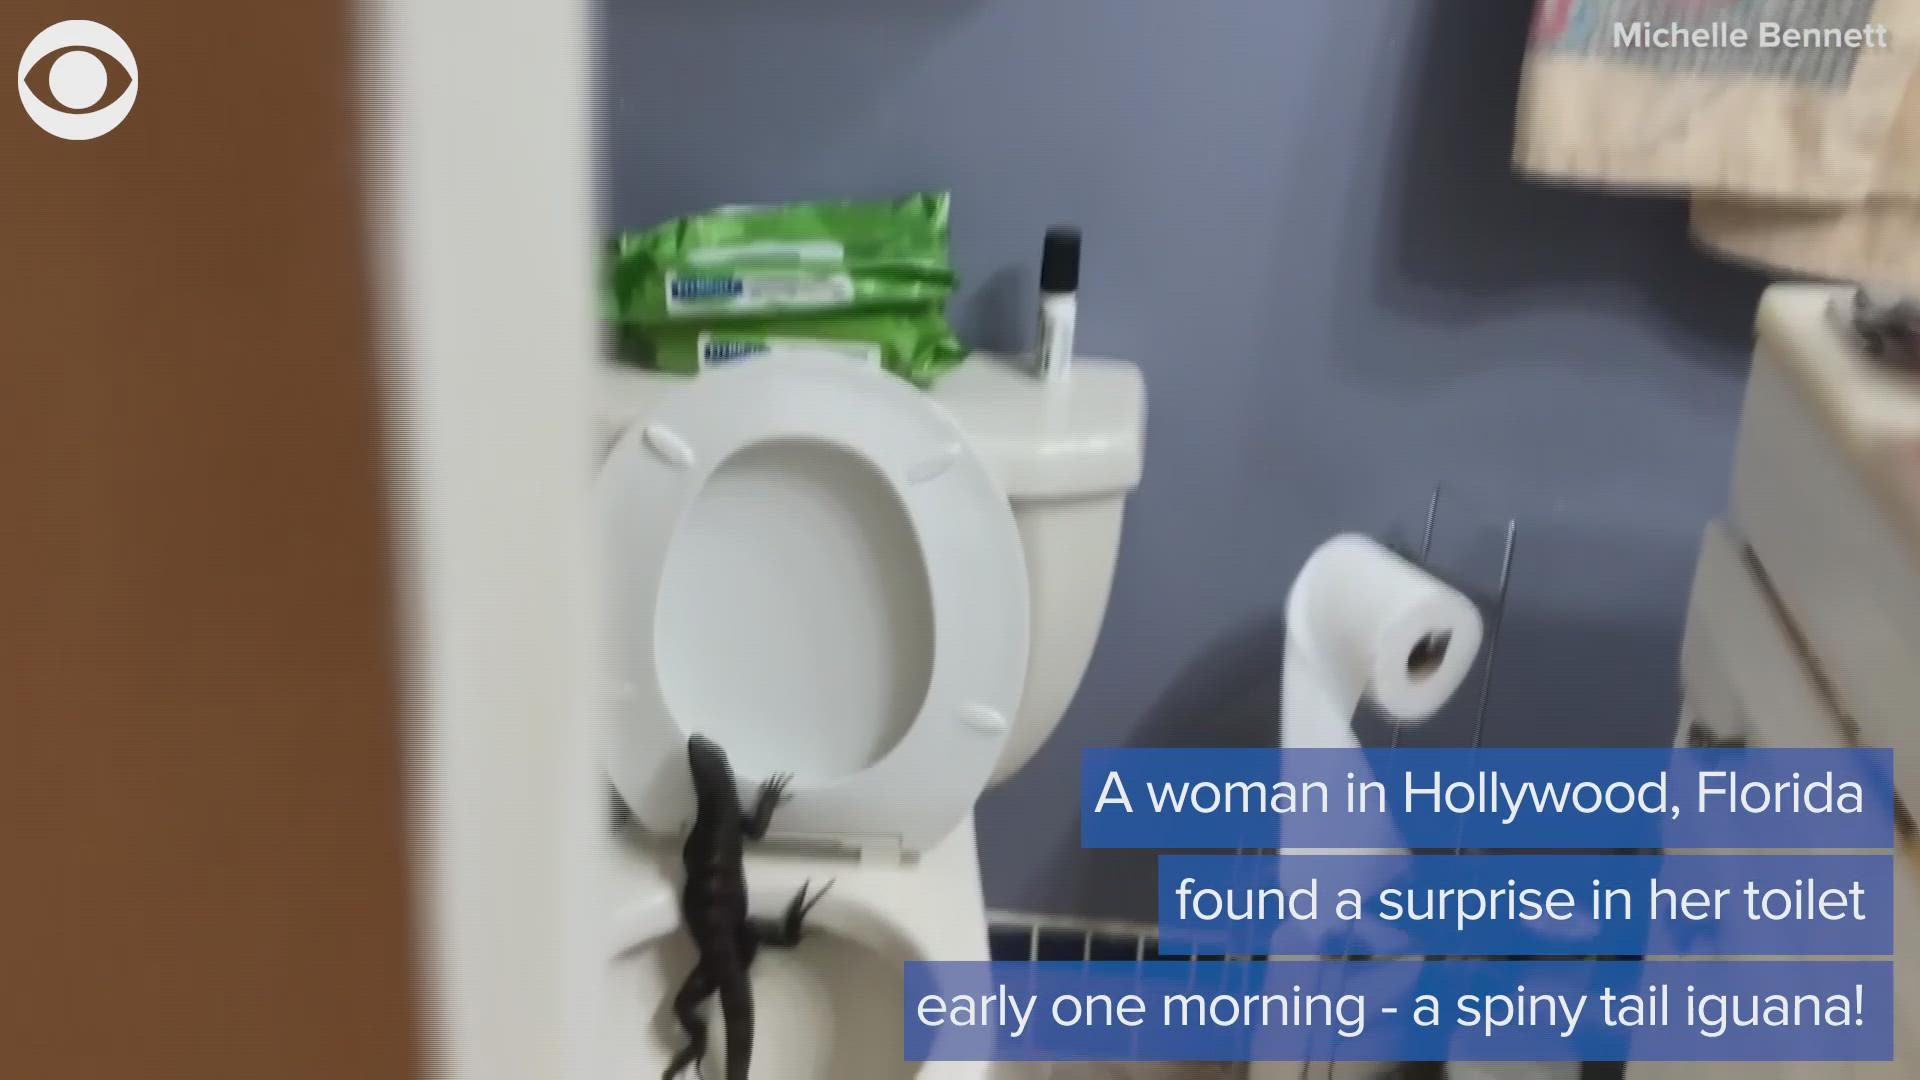 A woman got an unexpected wake up call when she found an iguana in her toilet one early morning in Hollywood, Florida.